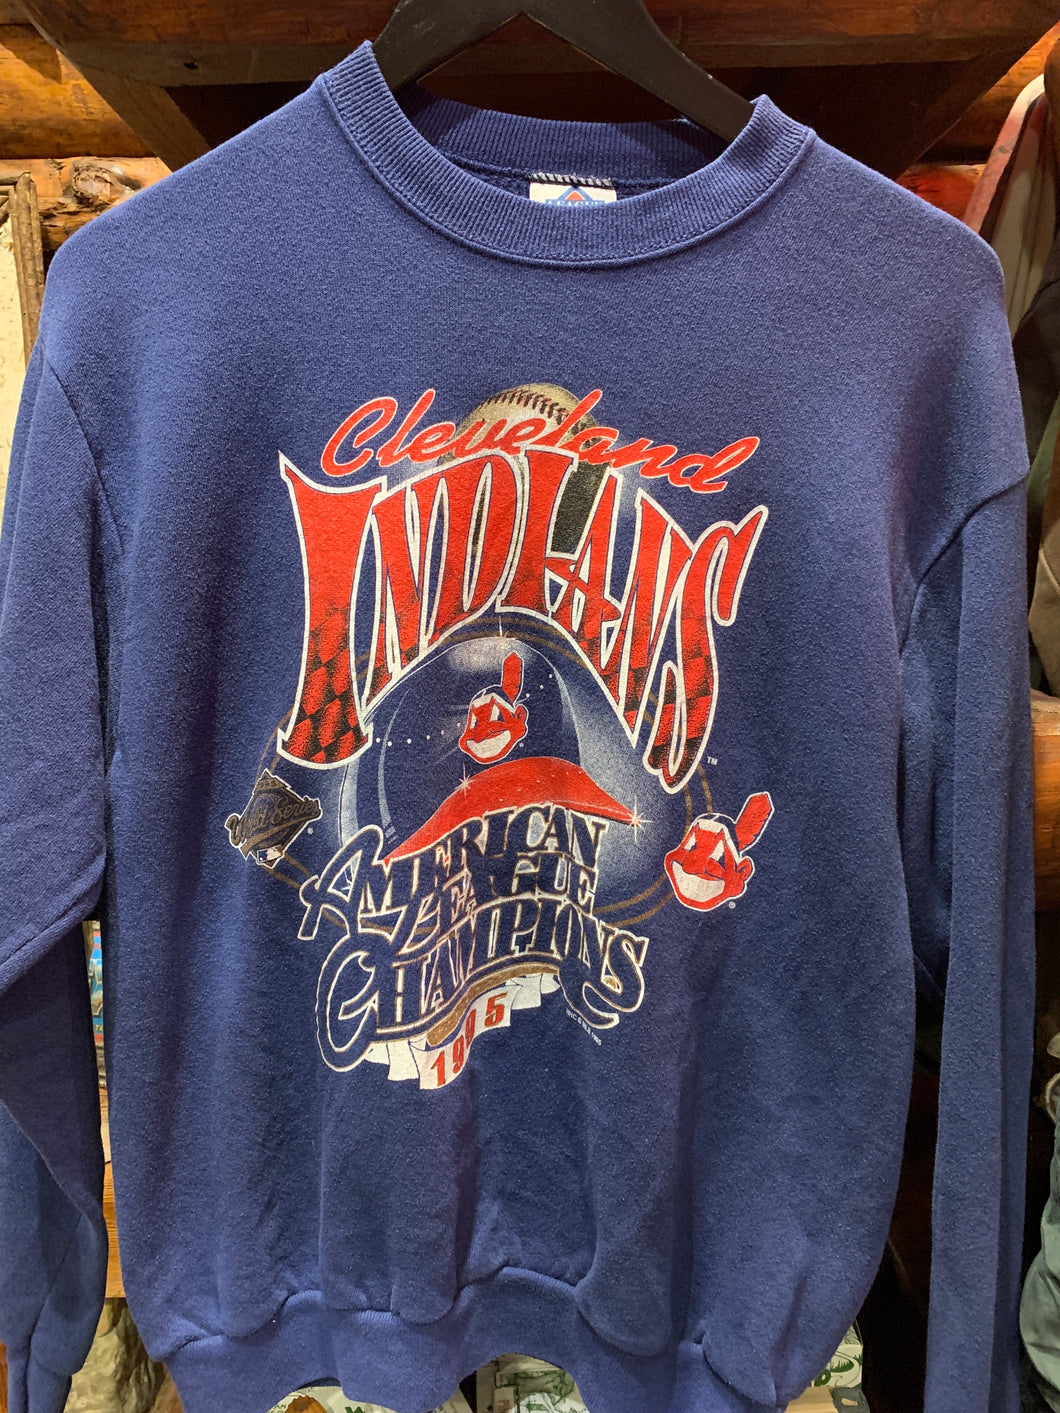 Vintage Cleveland Indians 1995 Sweater, Small - Medium